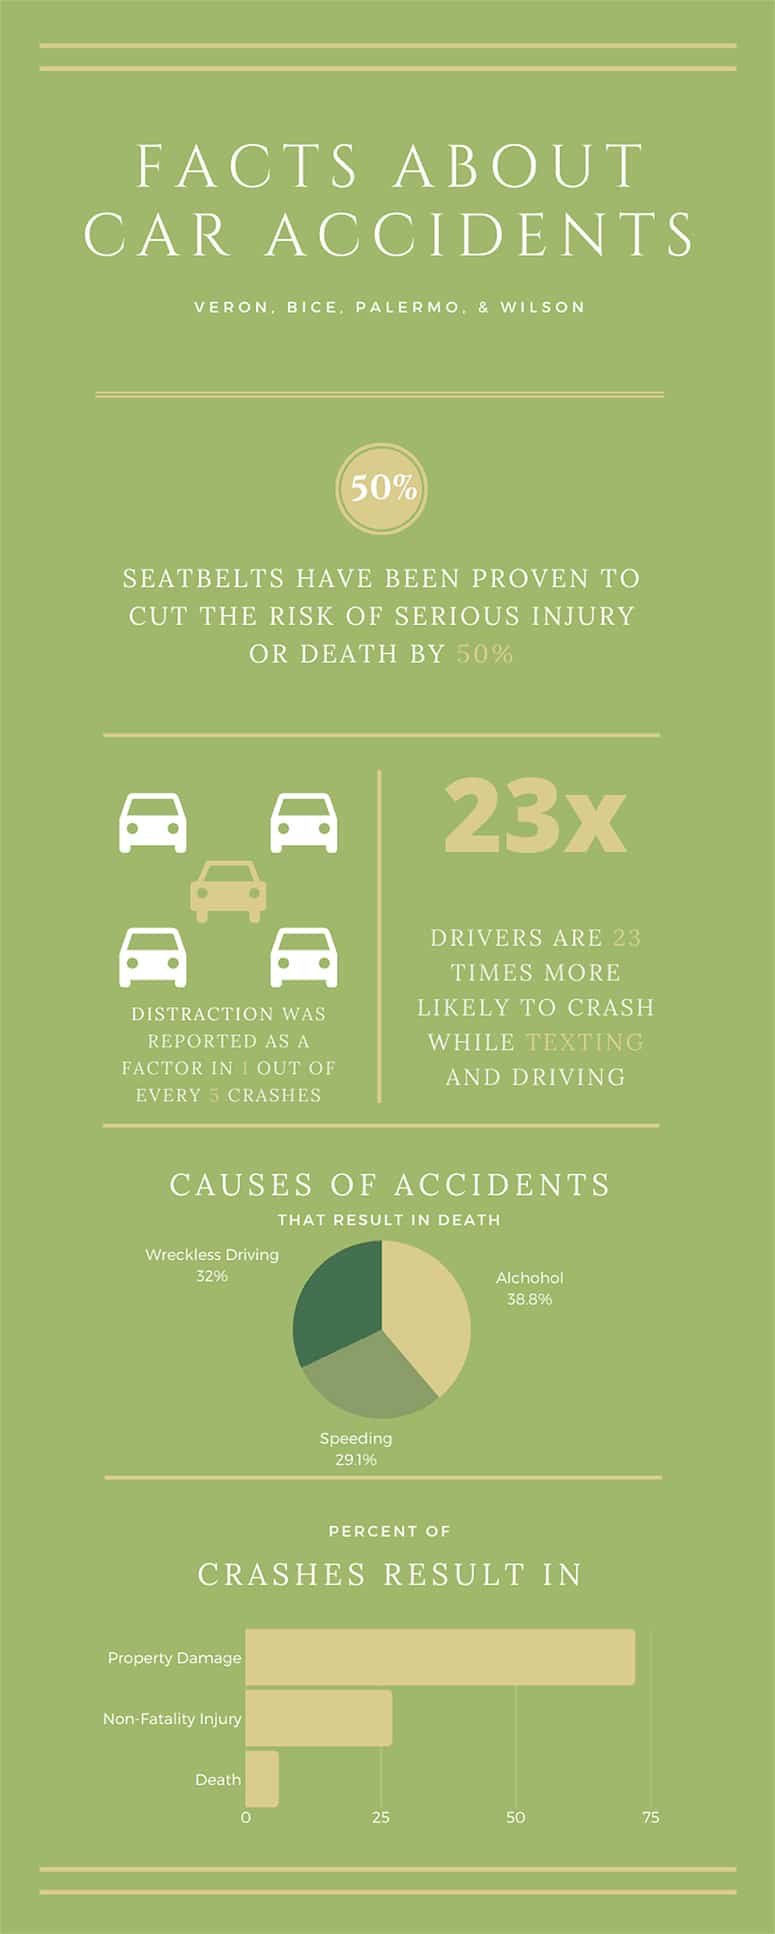 Facts About Car Accidents Infographic